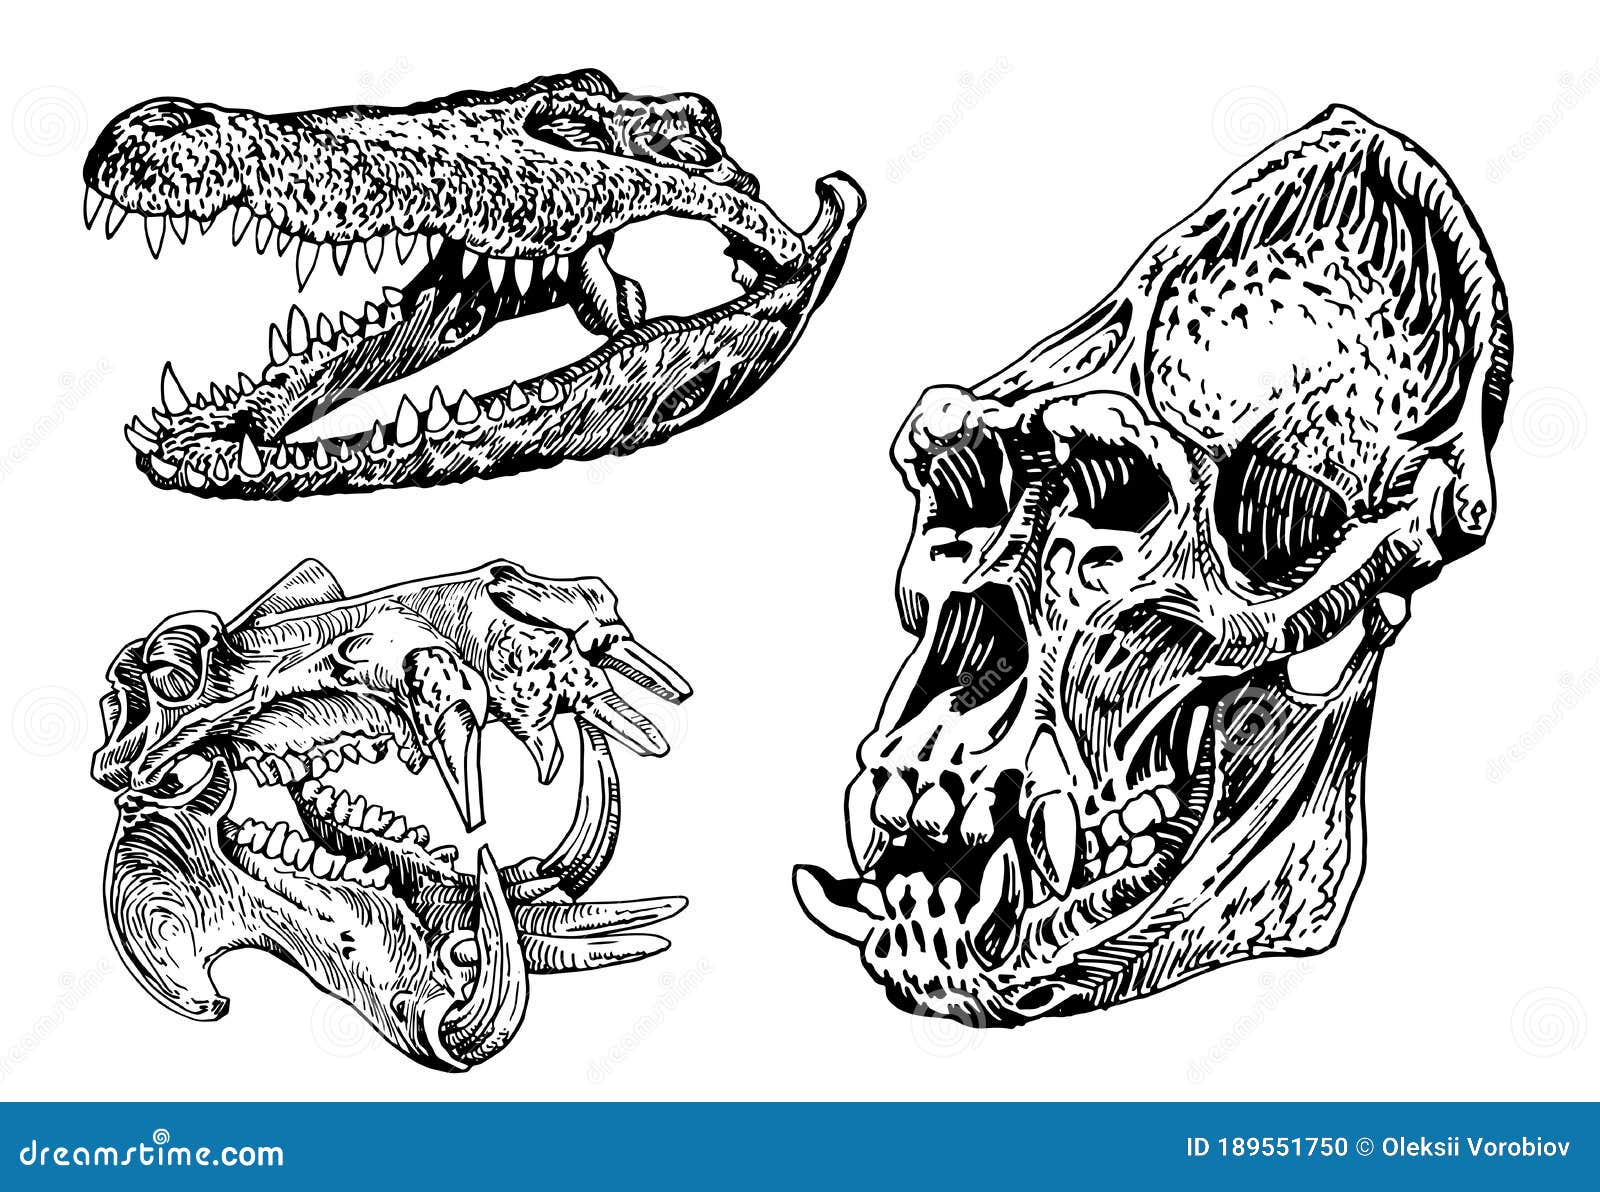 Pin Alligator Skull Drawing Giant By on Pinterest  Skull tattoo Animal skull  tattoos Skull tattoo design